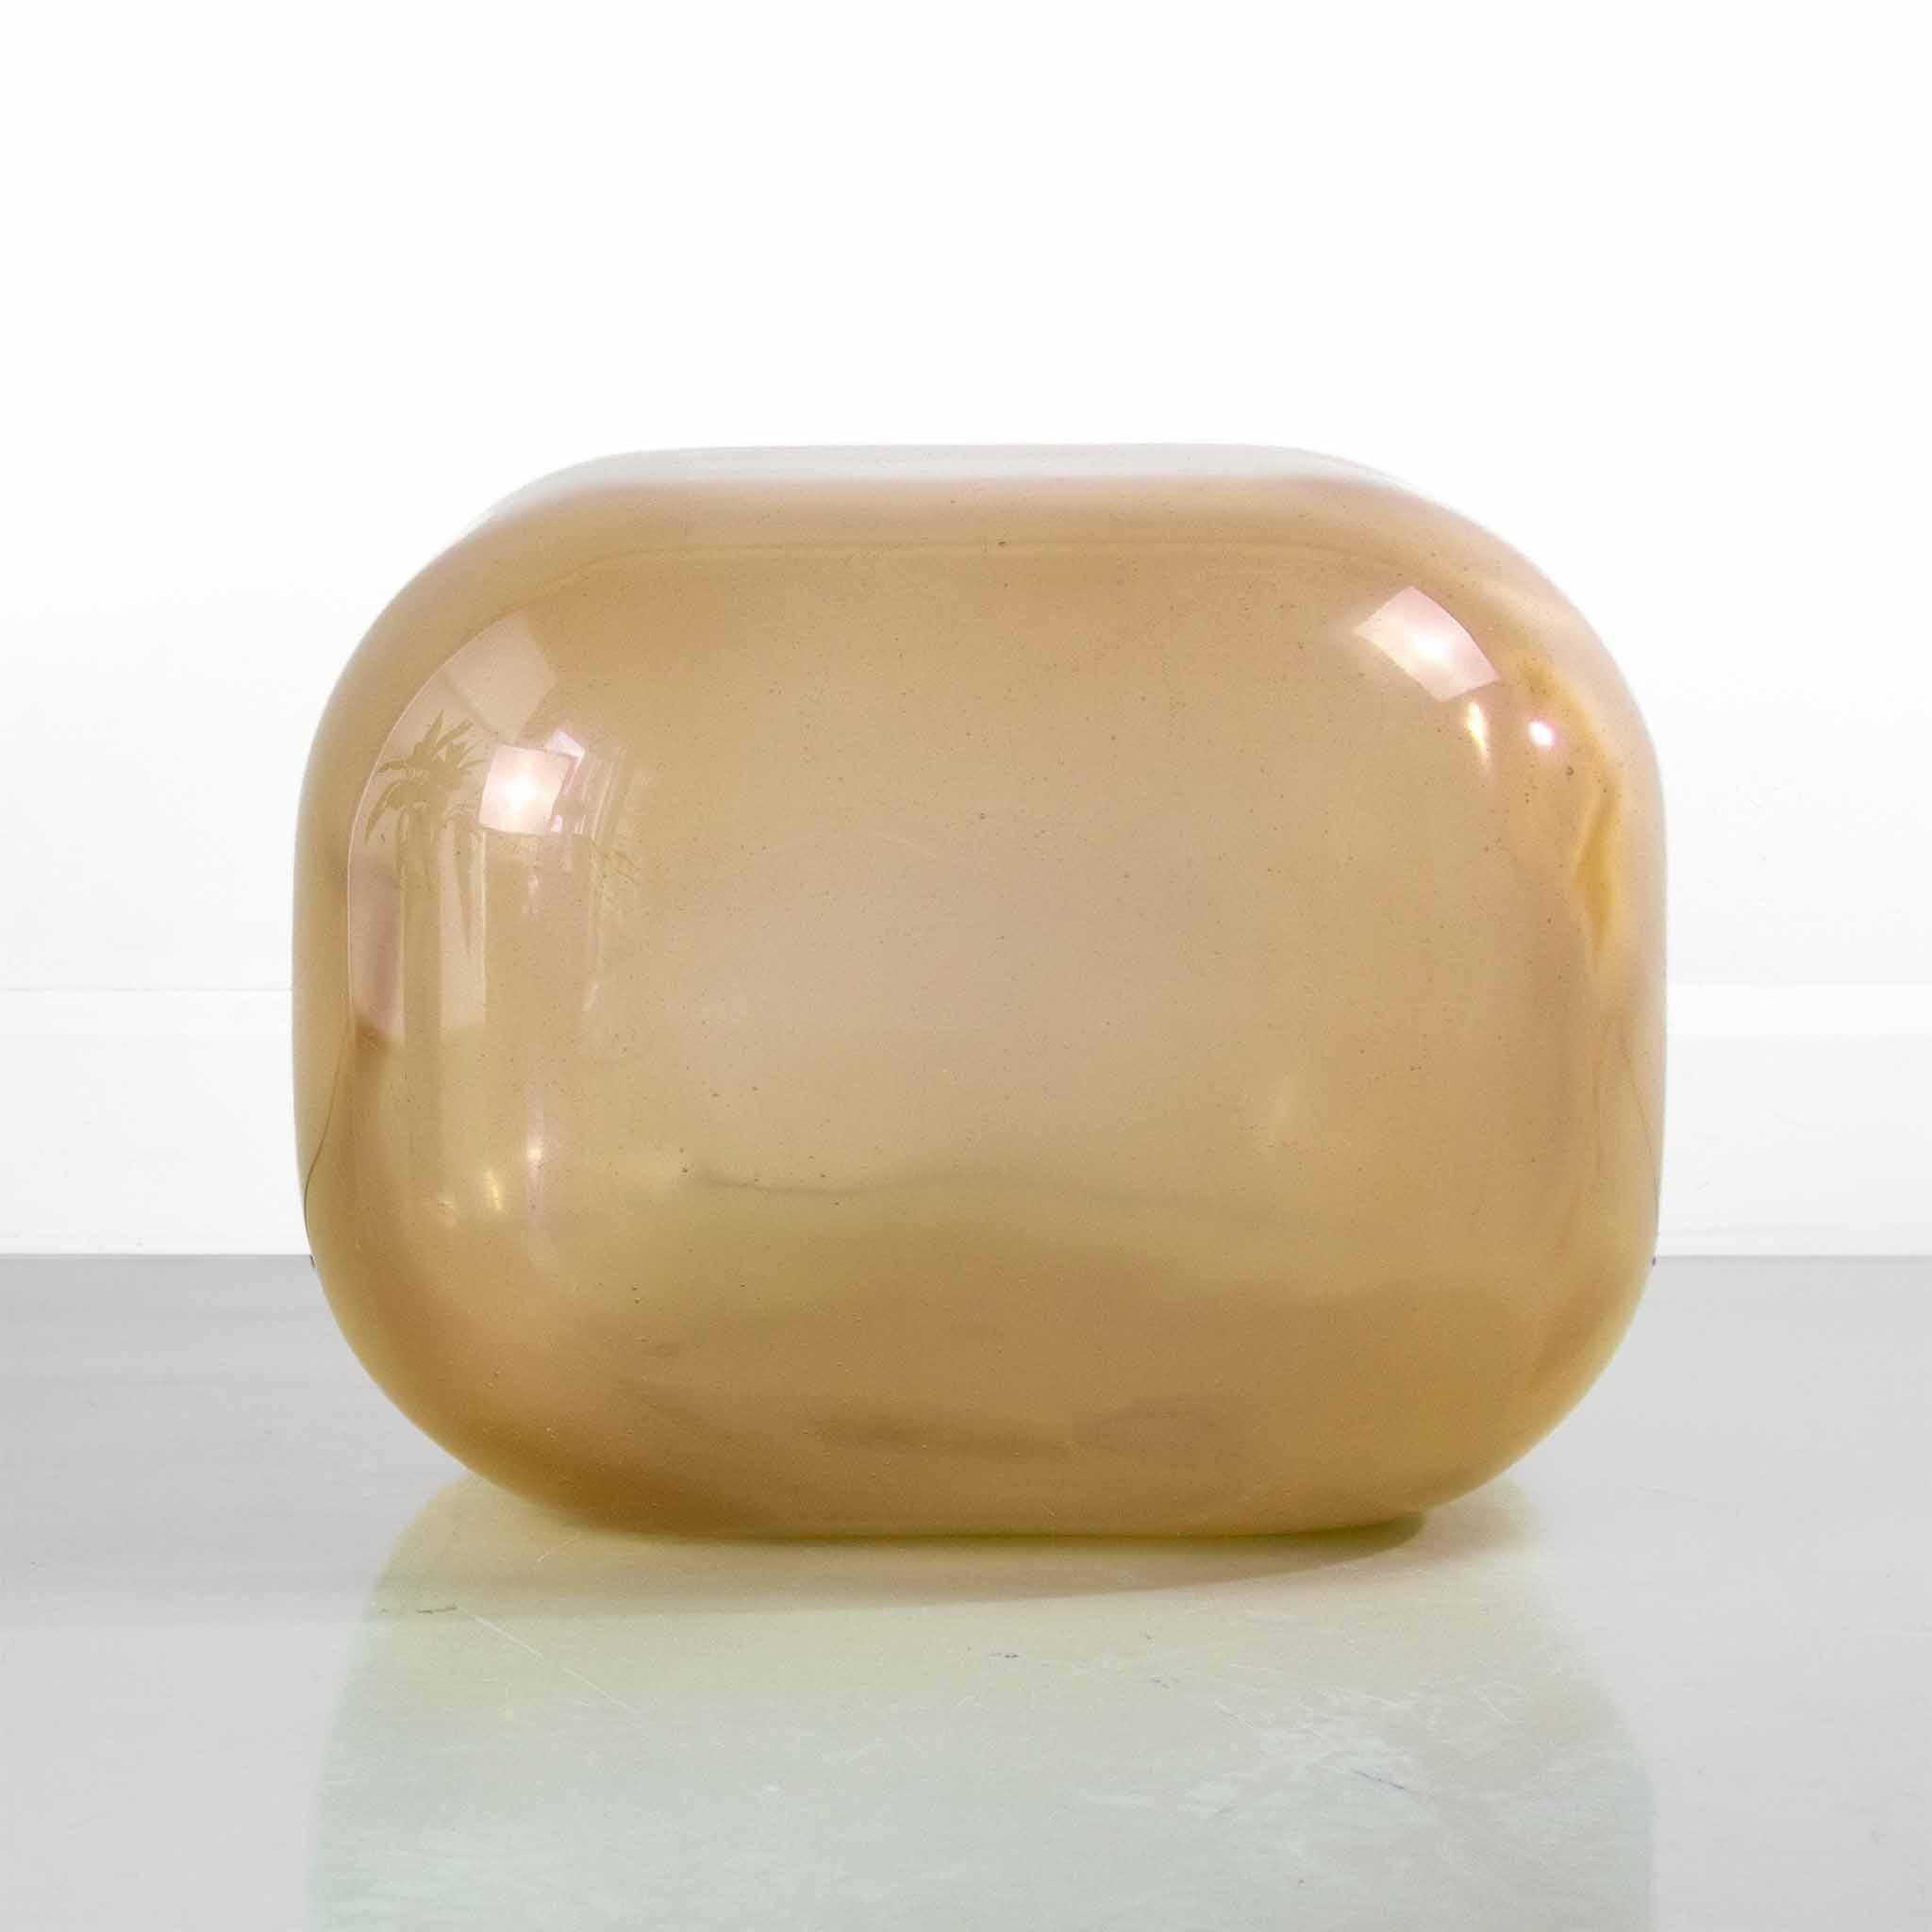 Honey Oort resin side table by Creators Of Objects
Materials: Resin, pigment
DImensions: W 51 x D 51 x H 40 cm
Also available: tourmaline, bordeaux, spice, ochre, forest, ocean, twilight, rock, lilac, cerise, coral spice, honey, moss, surf, eve,